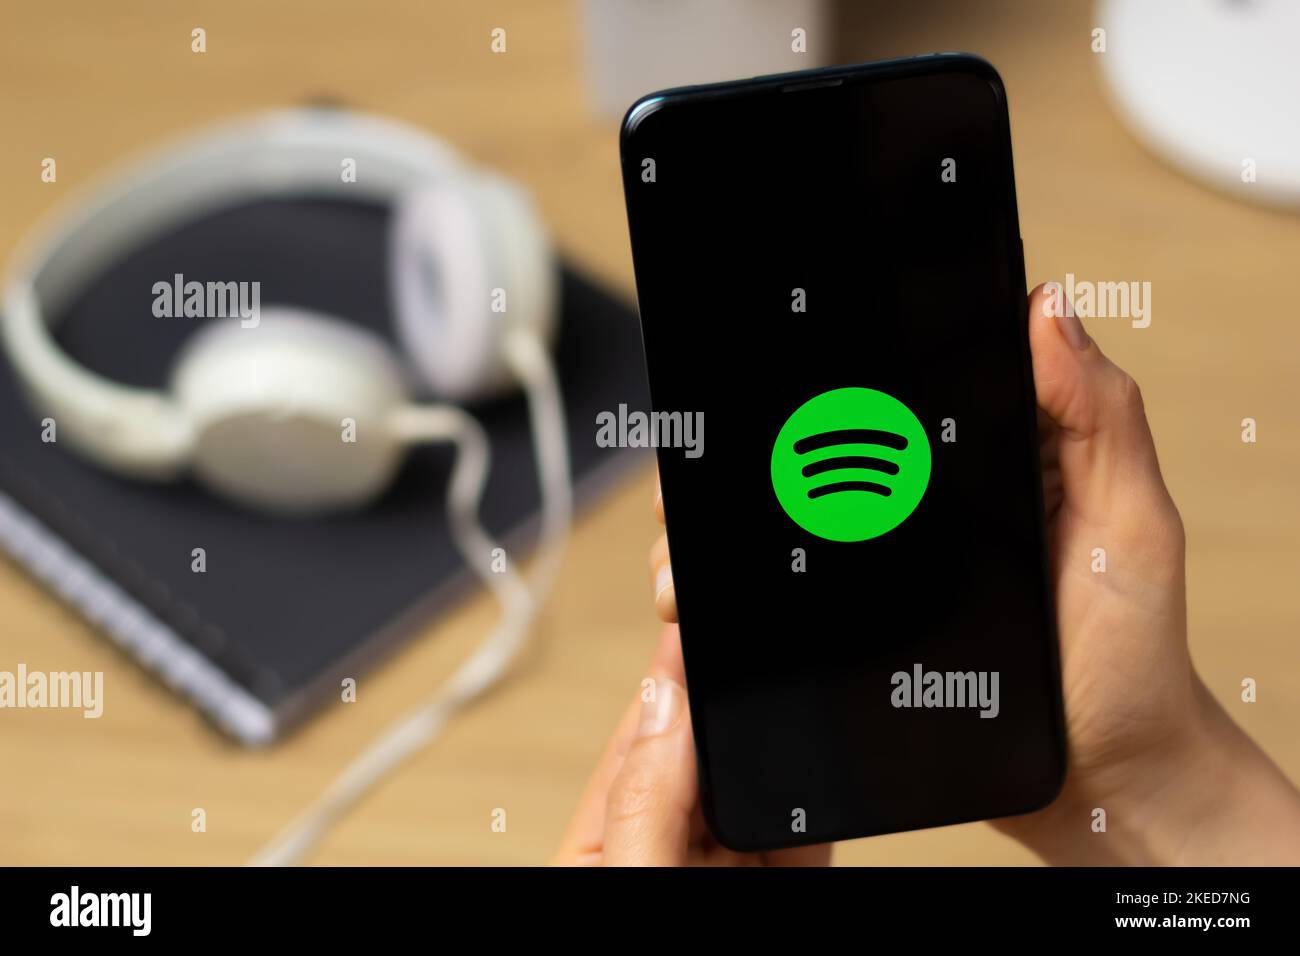 Kyiv, Ukraine - Oct. 15th, 2022: Spotify logo on the screen of a smartphone in the hands of a woman. Streaming service for listening to music. Stock Photo